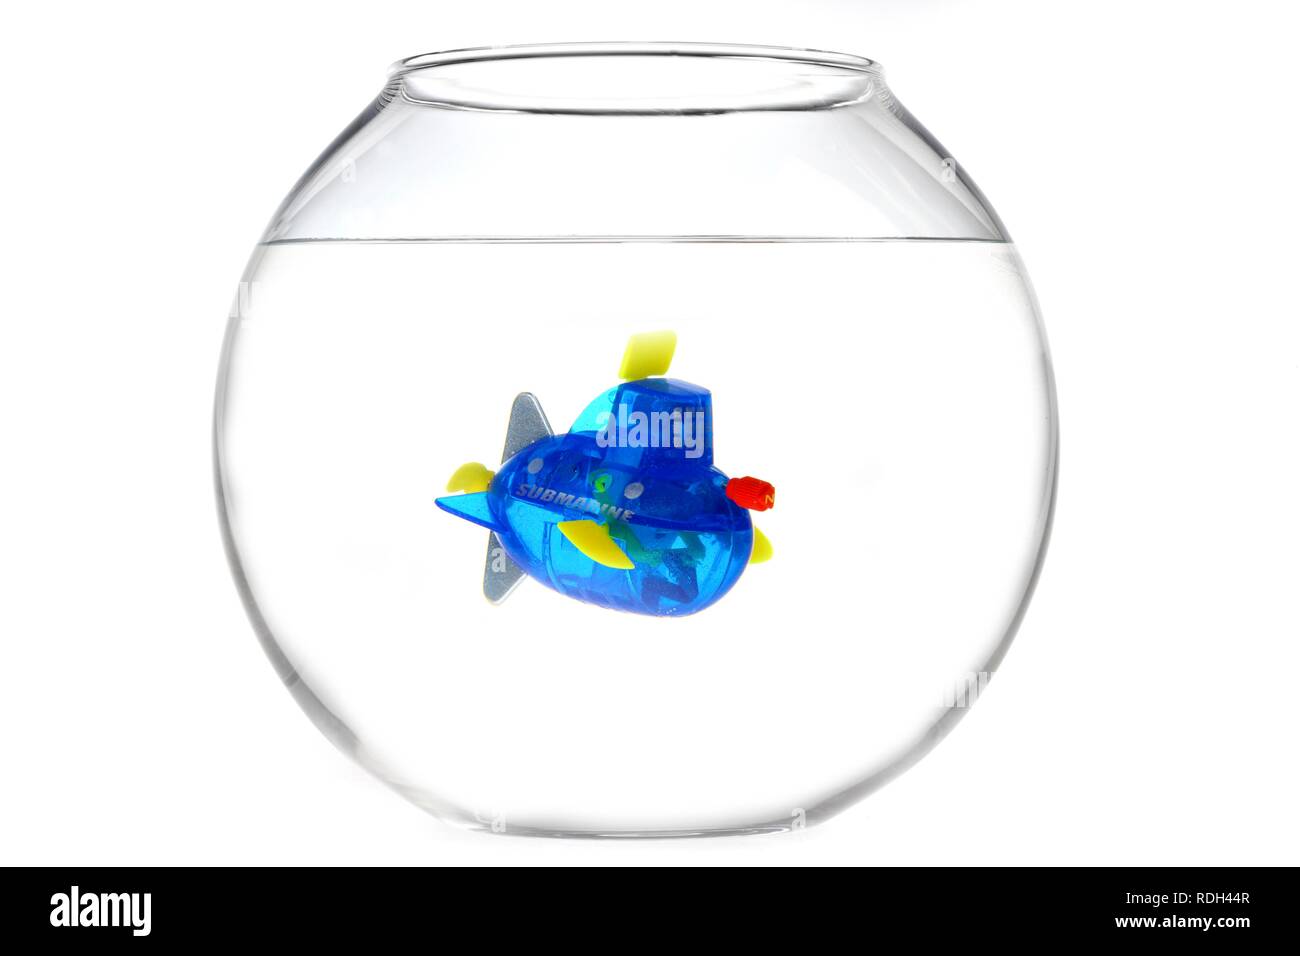 Wind-up toy mini-submarine in a fish bowl, illustration Stock Photo